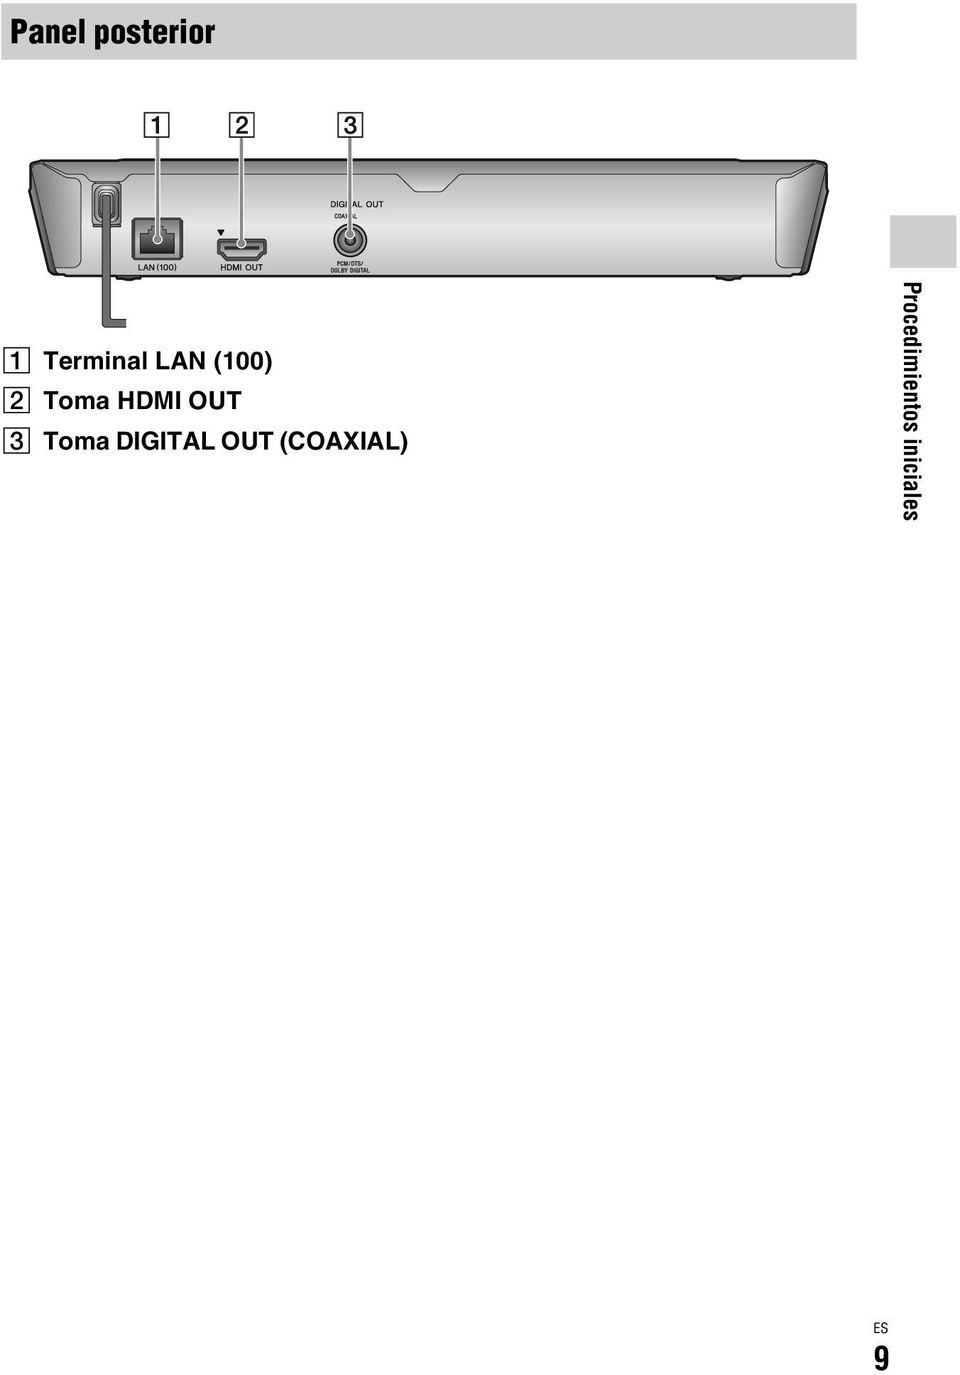 Toma DIGITAL OUT (COAXIAL)